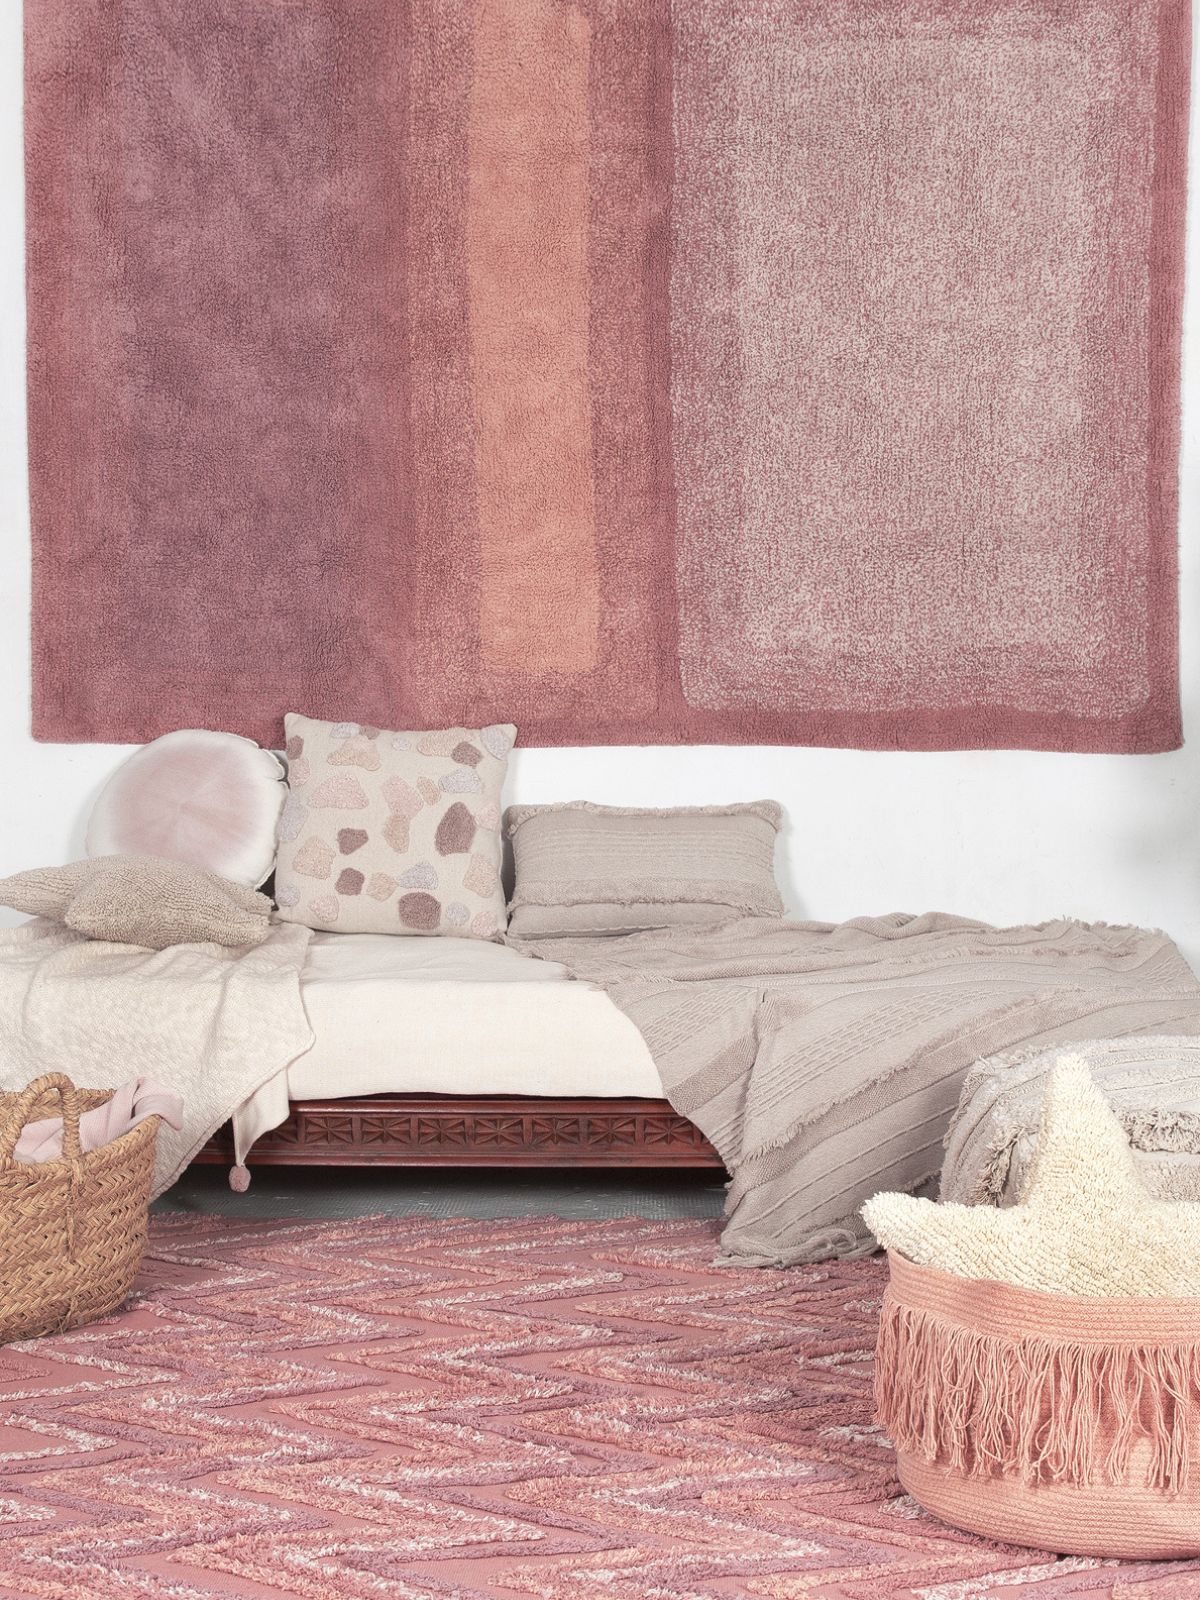 Tappeto in cotone lavabile Water Canyon Rose, 140x200 cm.-3